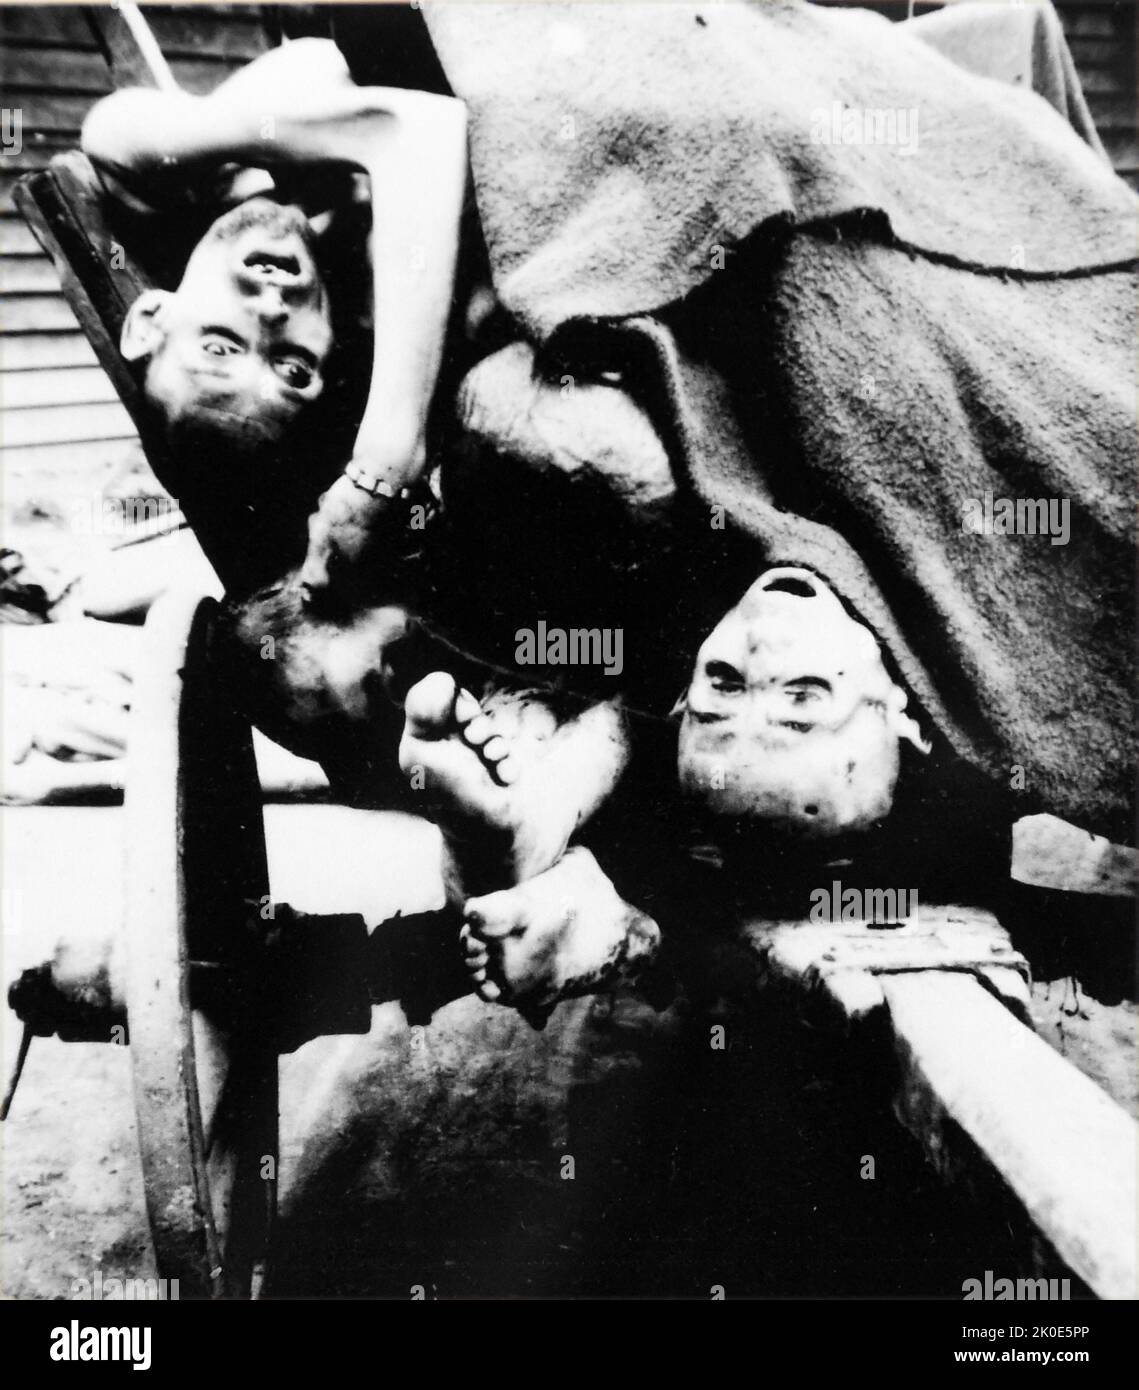 Victims of starvation at Gusen a subcamp of Mauthausen concentration camp operated by the SS in Upper Austria. Primarily populated by Polish prisoners, there were also large numbers of Spanish Republicans, Soviet citizens, and Italians. The camp's purpose of extermination through labour of real and perceived enemies of Nazi Germany. Stock Photo